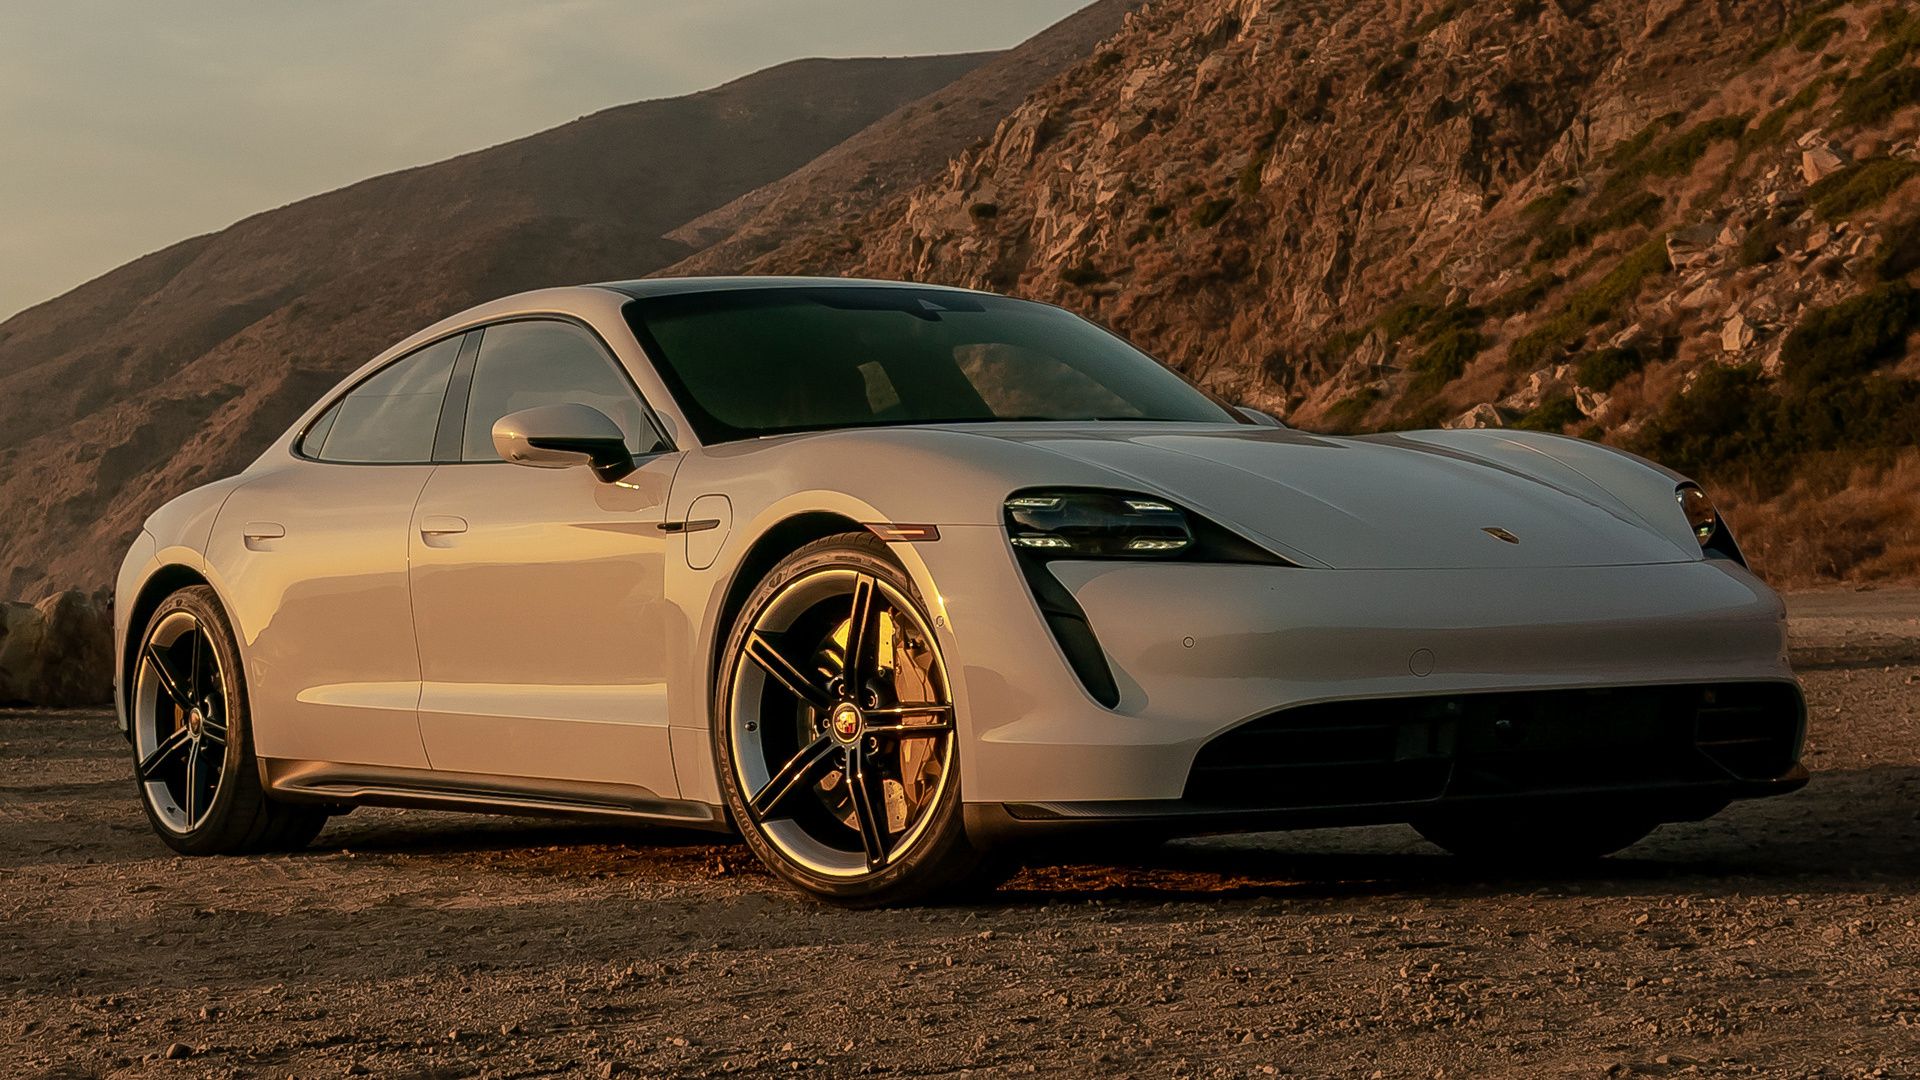 Porsche Taycan Turbo S (US) and HD Image. Car